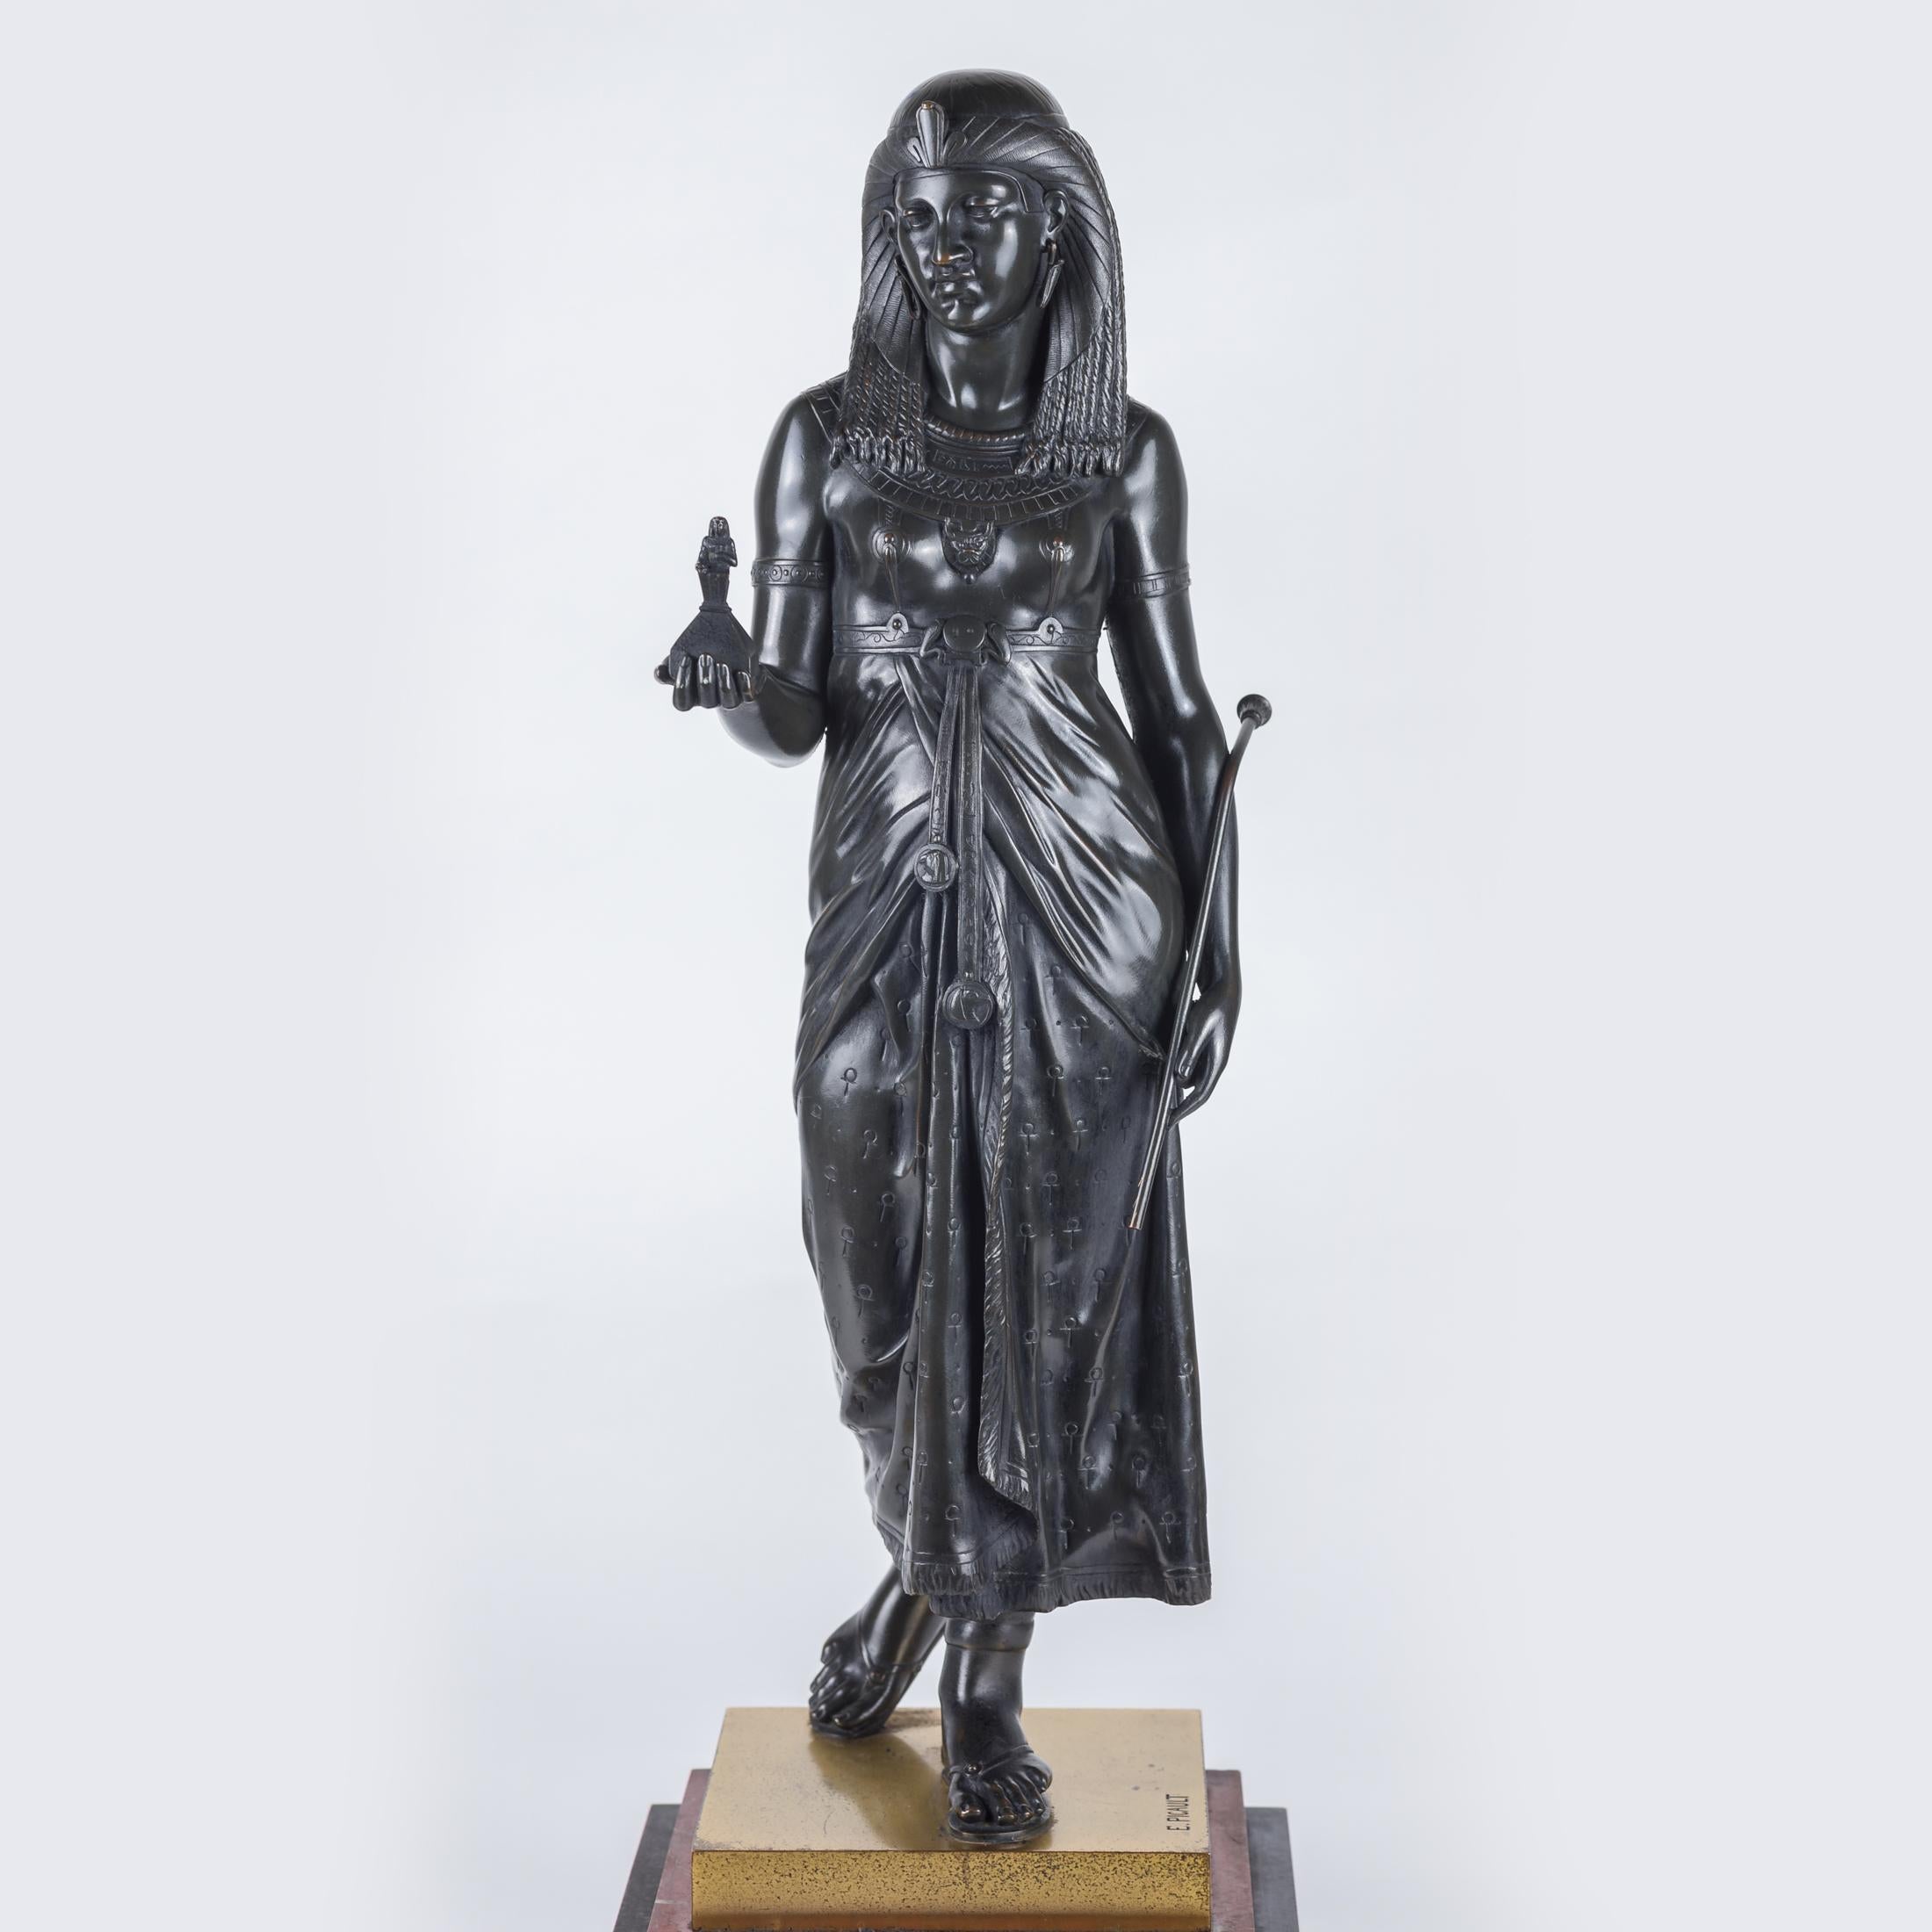 EMILE LOUIS PICAULT
French, (1833-1915)

Pair of Figural Sculptures of King Menthuophi and Queen Nitocris

Signed 